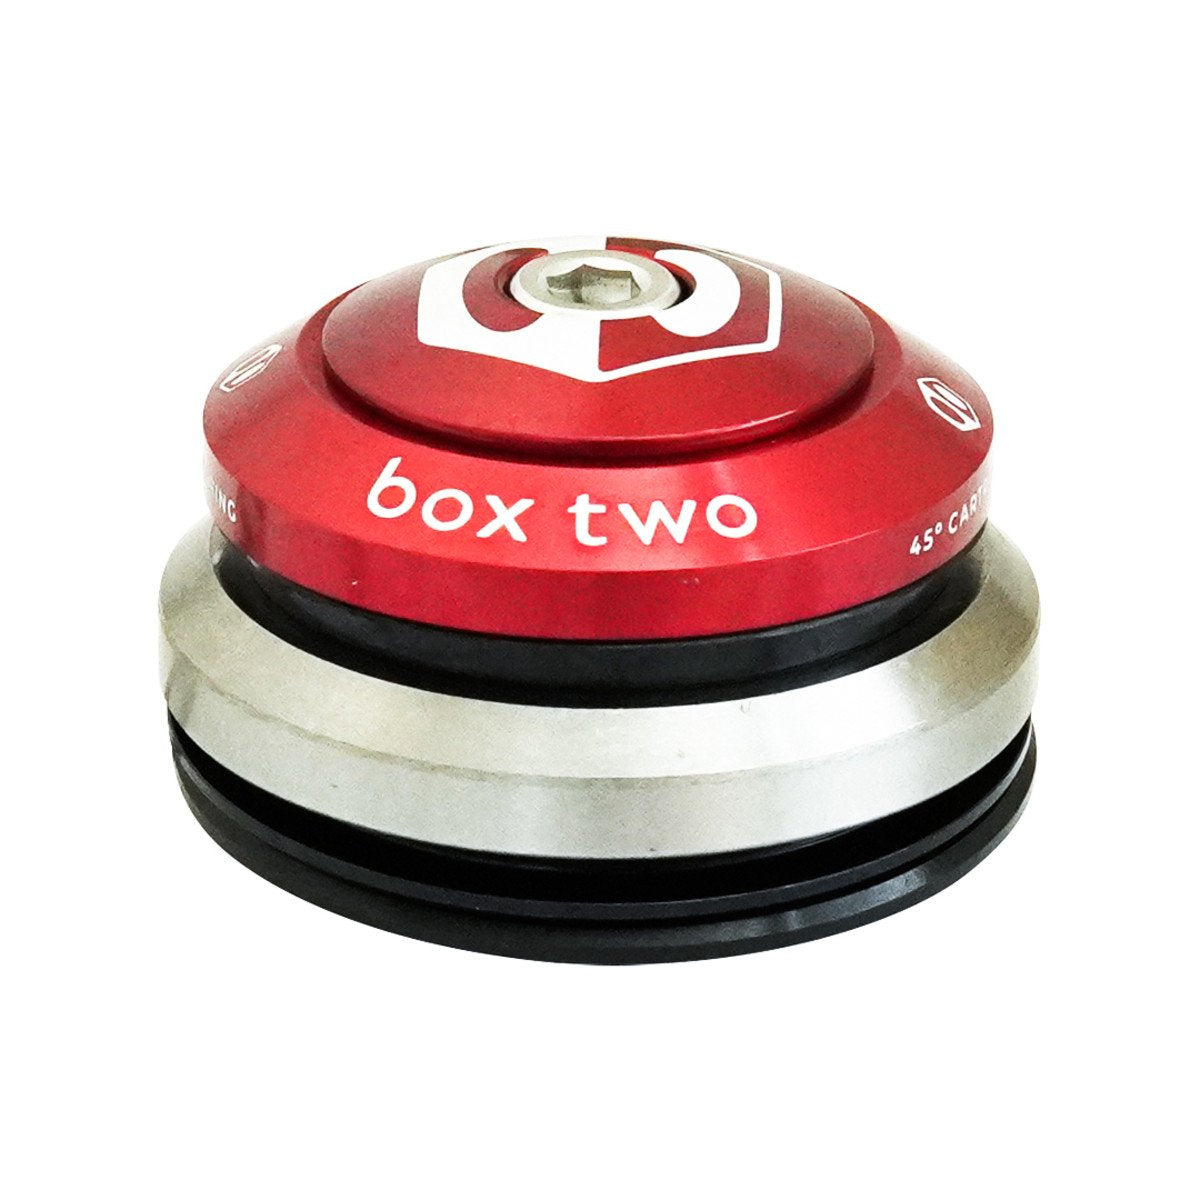 BOX TWO INTEGRATED TAPERED HEADSET 1.5"